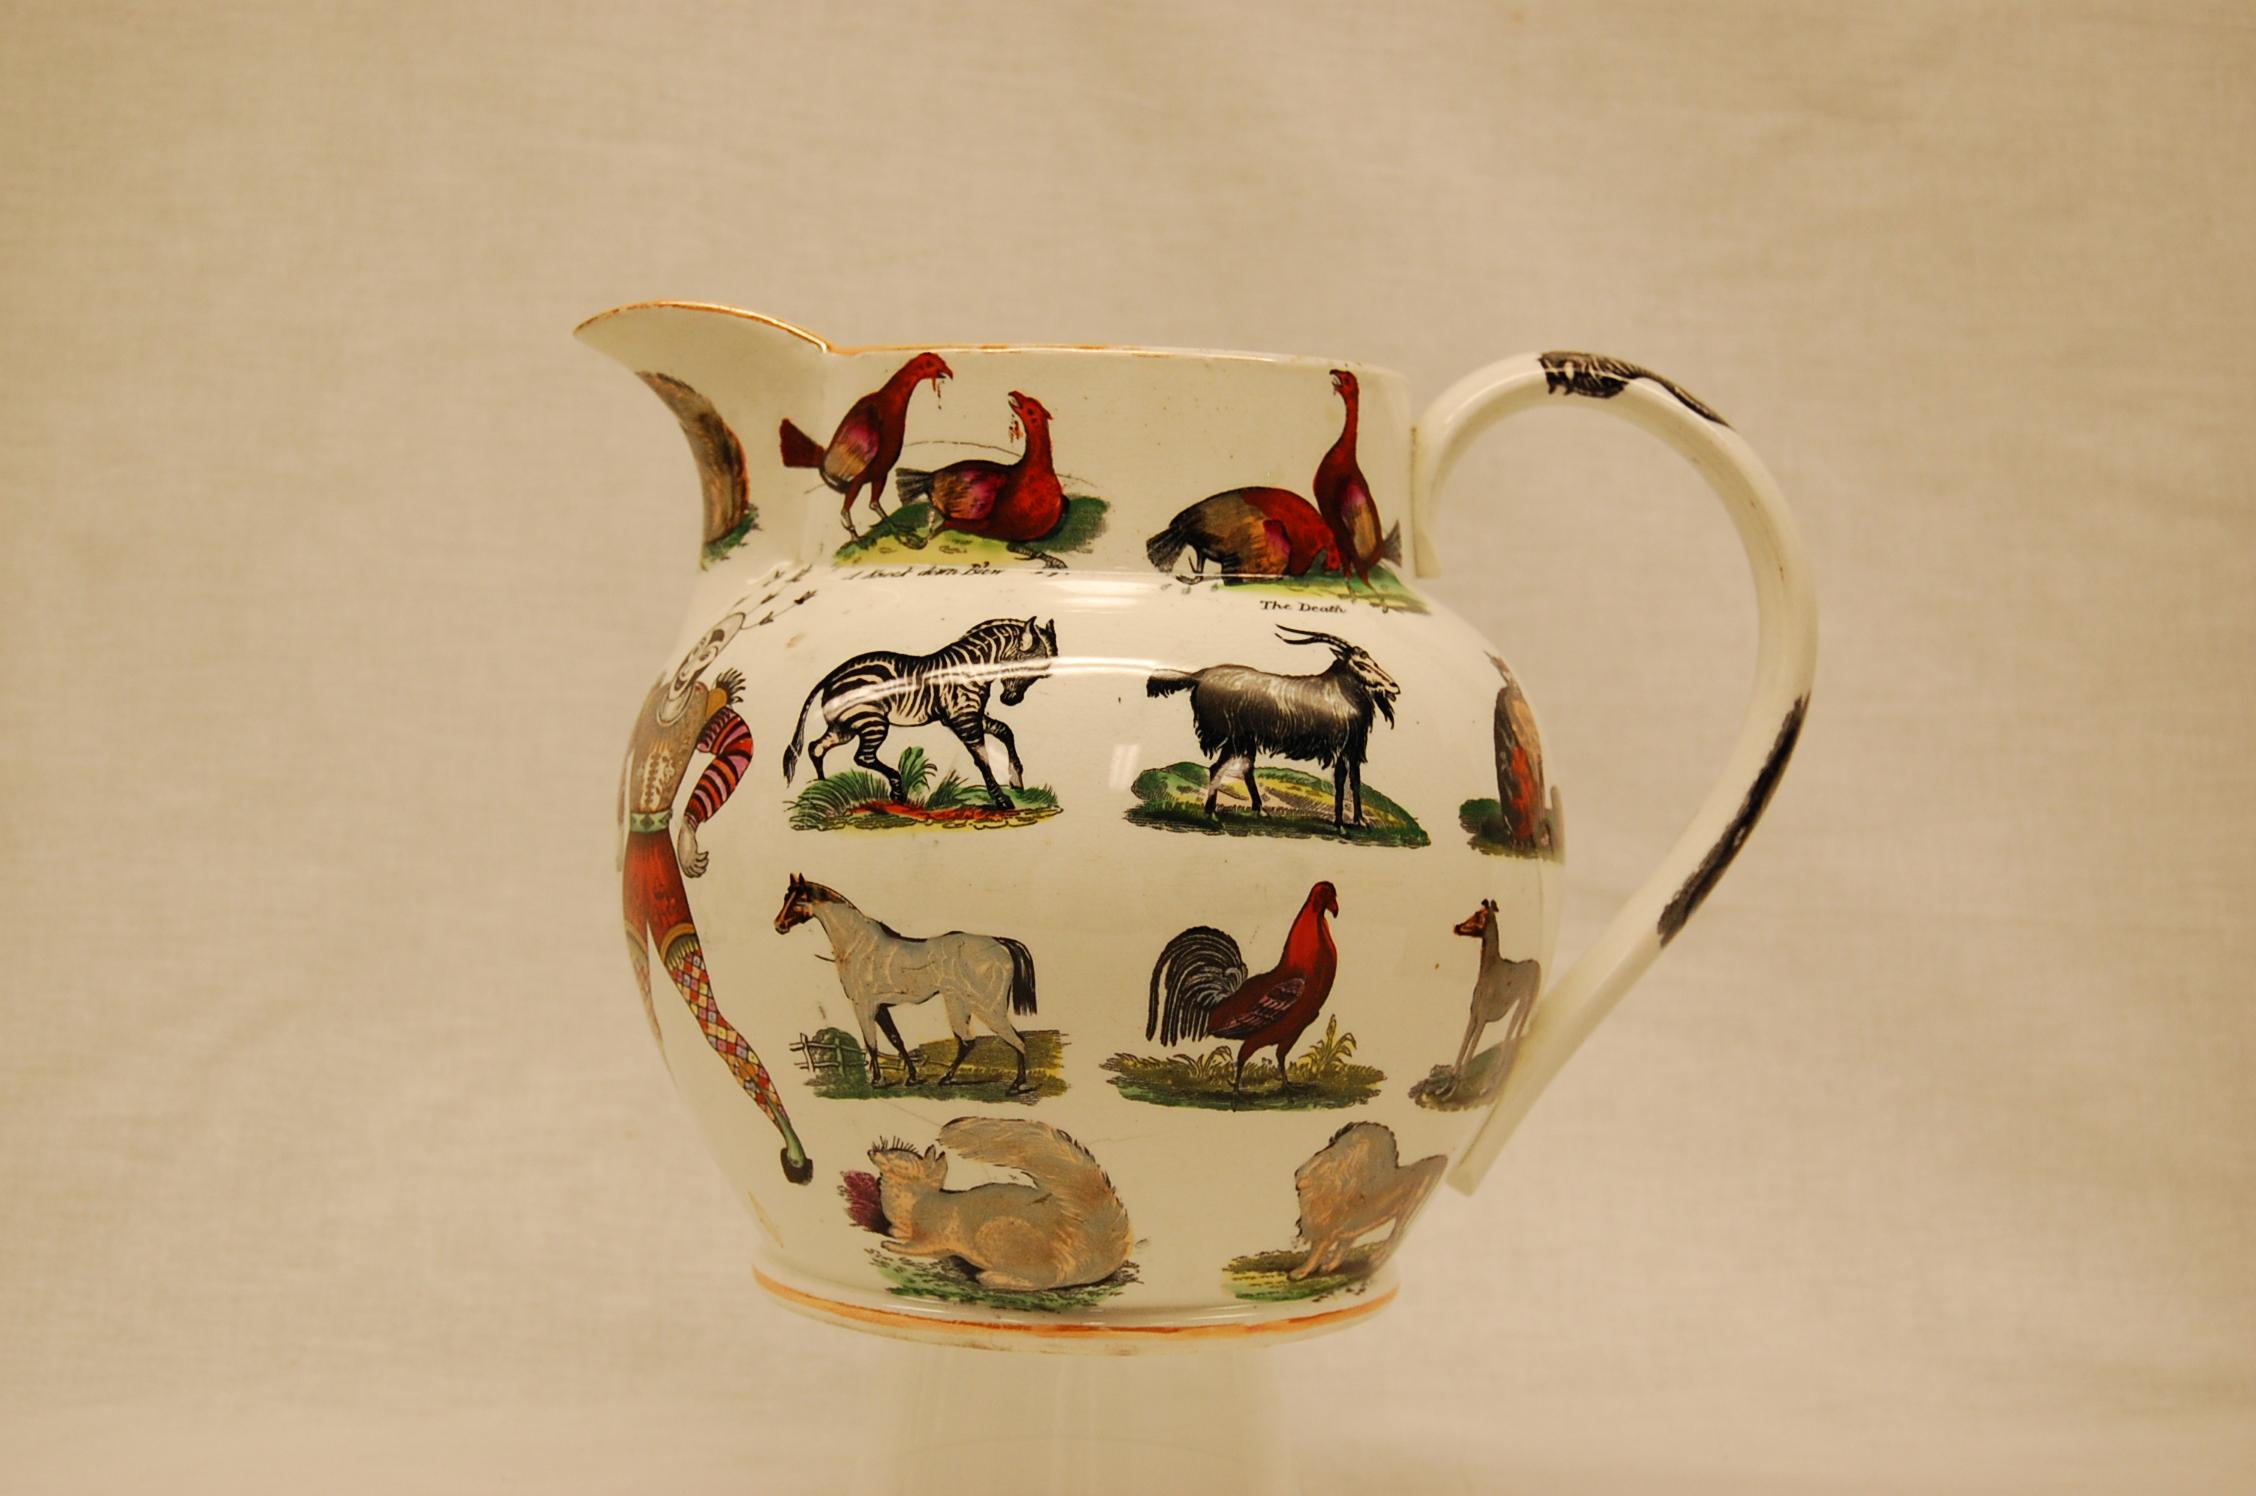 A superb, large, circa 1850 English ironstone ale jug manufactured by Elsmore & Forster, Turnstill, England in the Harlequin pattern, additionally desirable as is it exuberantly decorated in vibrantly-colored lusterware transfers of exotic, woodland